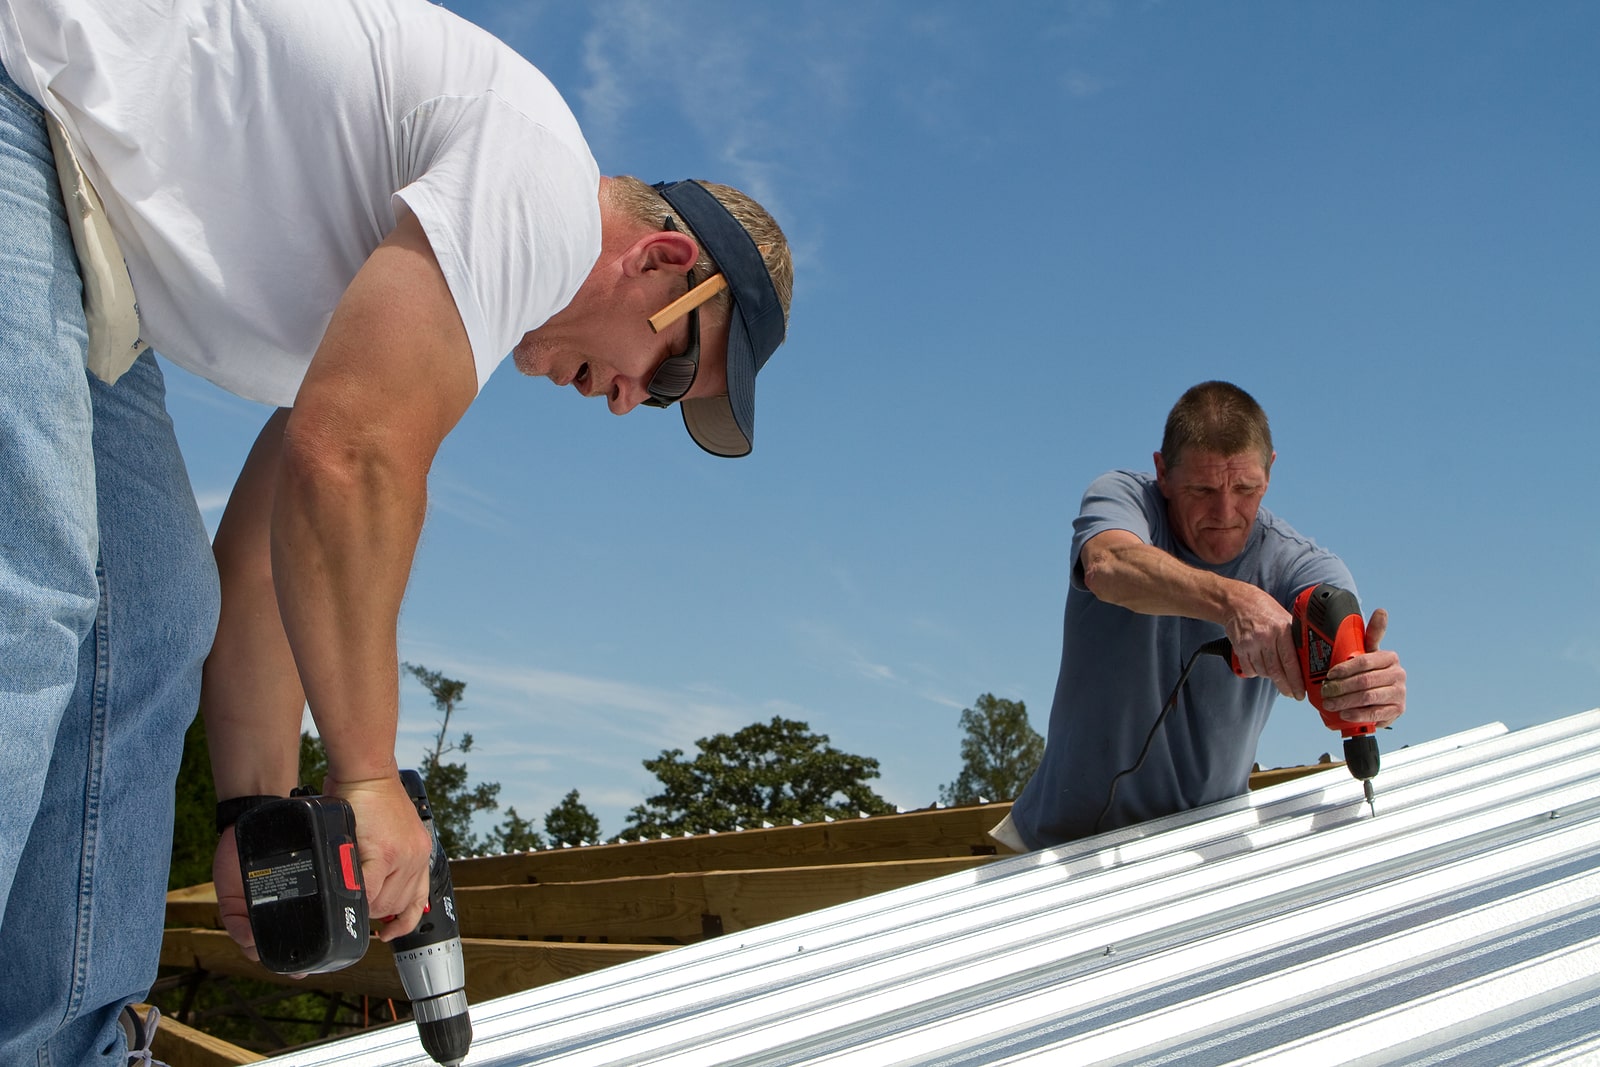 What Does a Roofing Job Involve?